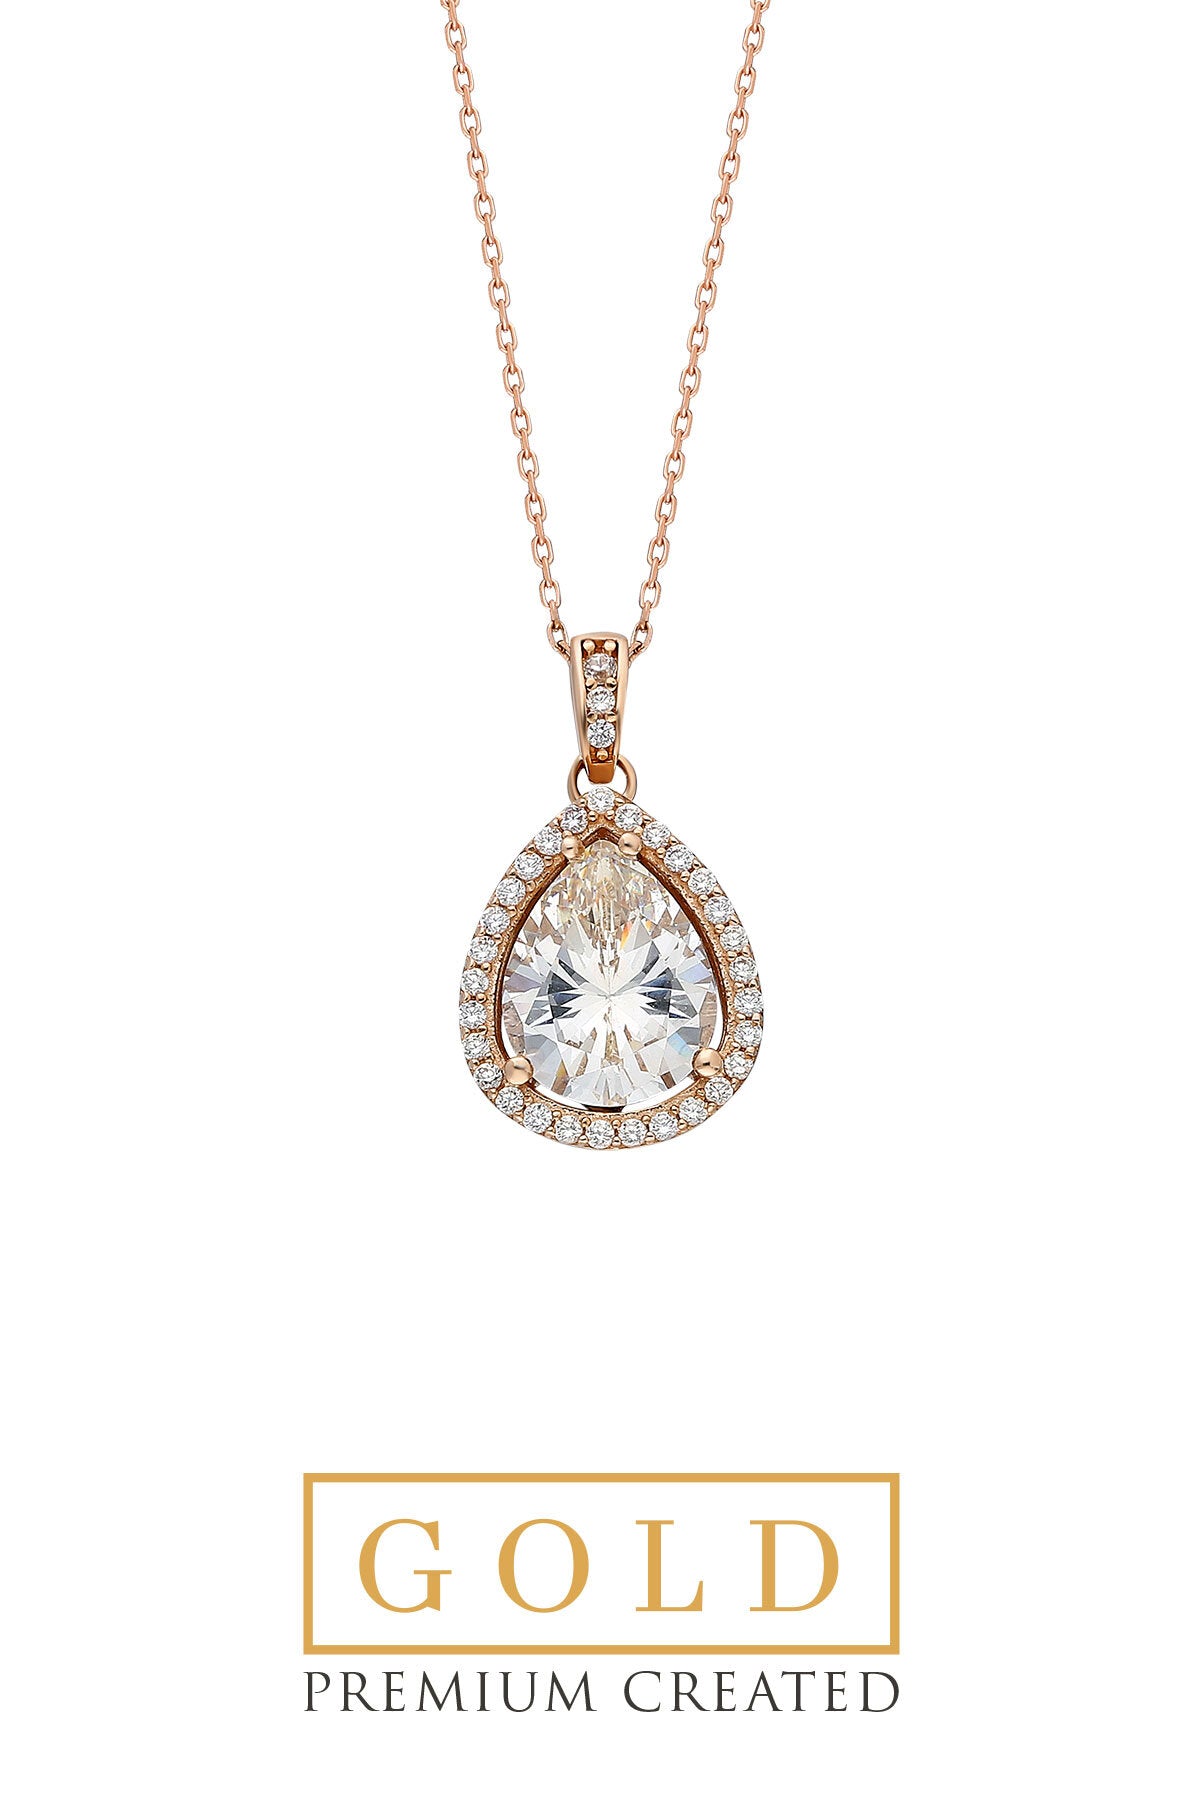 14 K Rose Gold Certified Gold Premium Created Stone Drop Solitaire Necklace